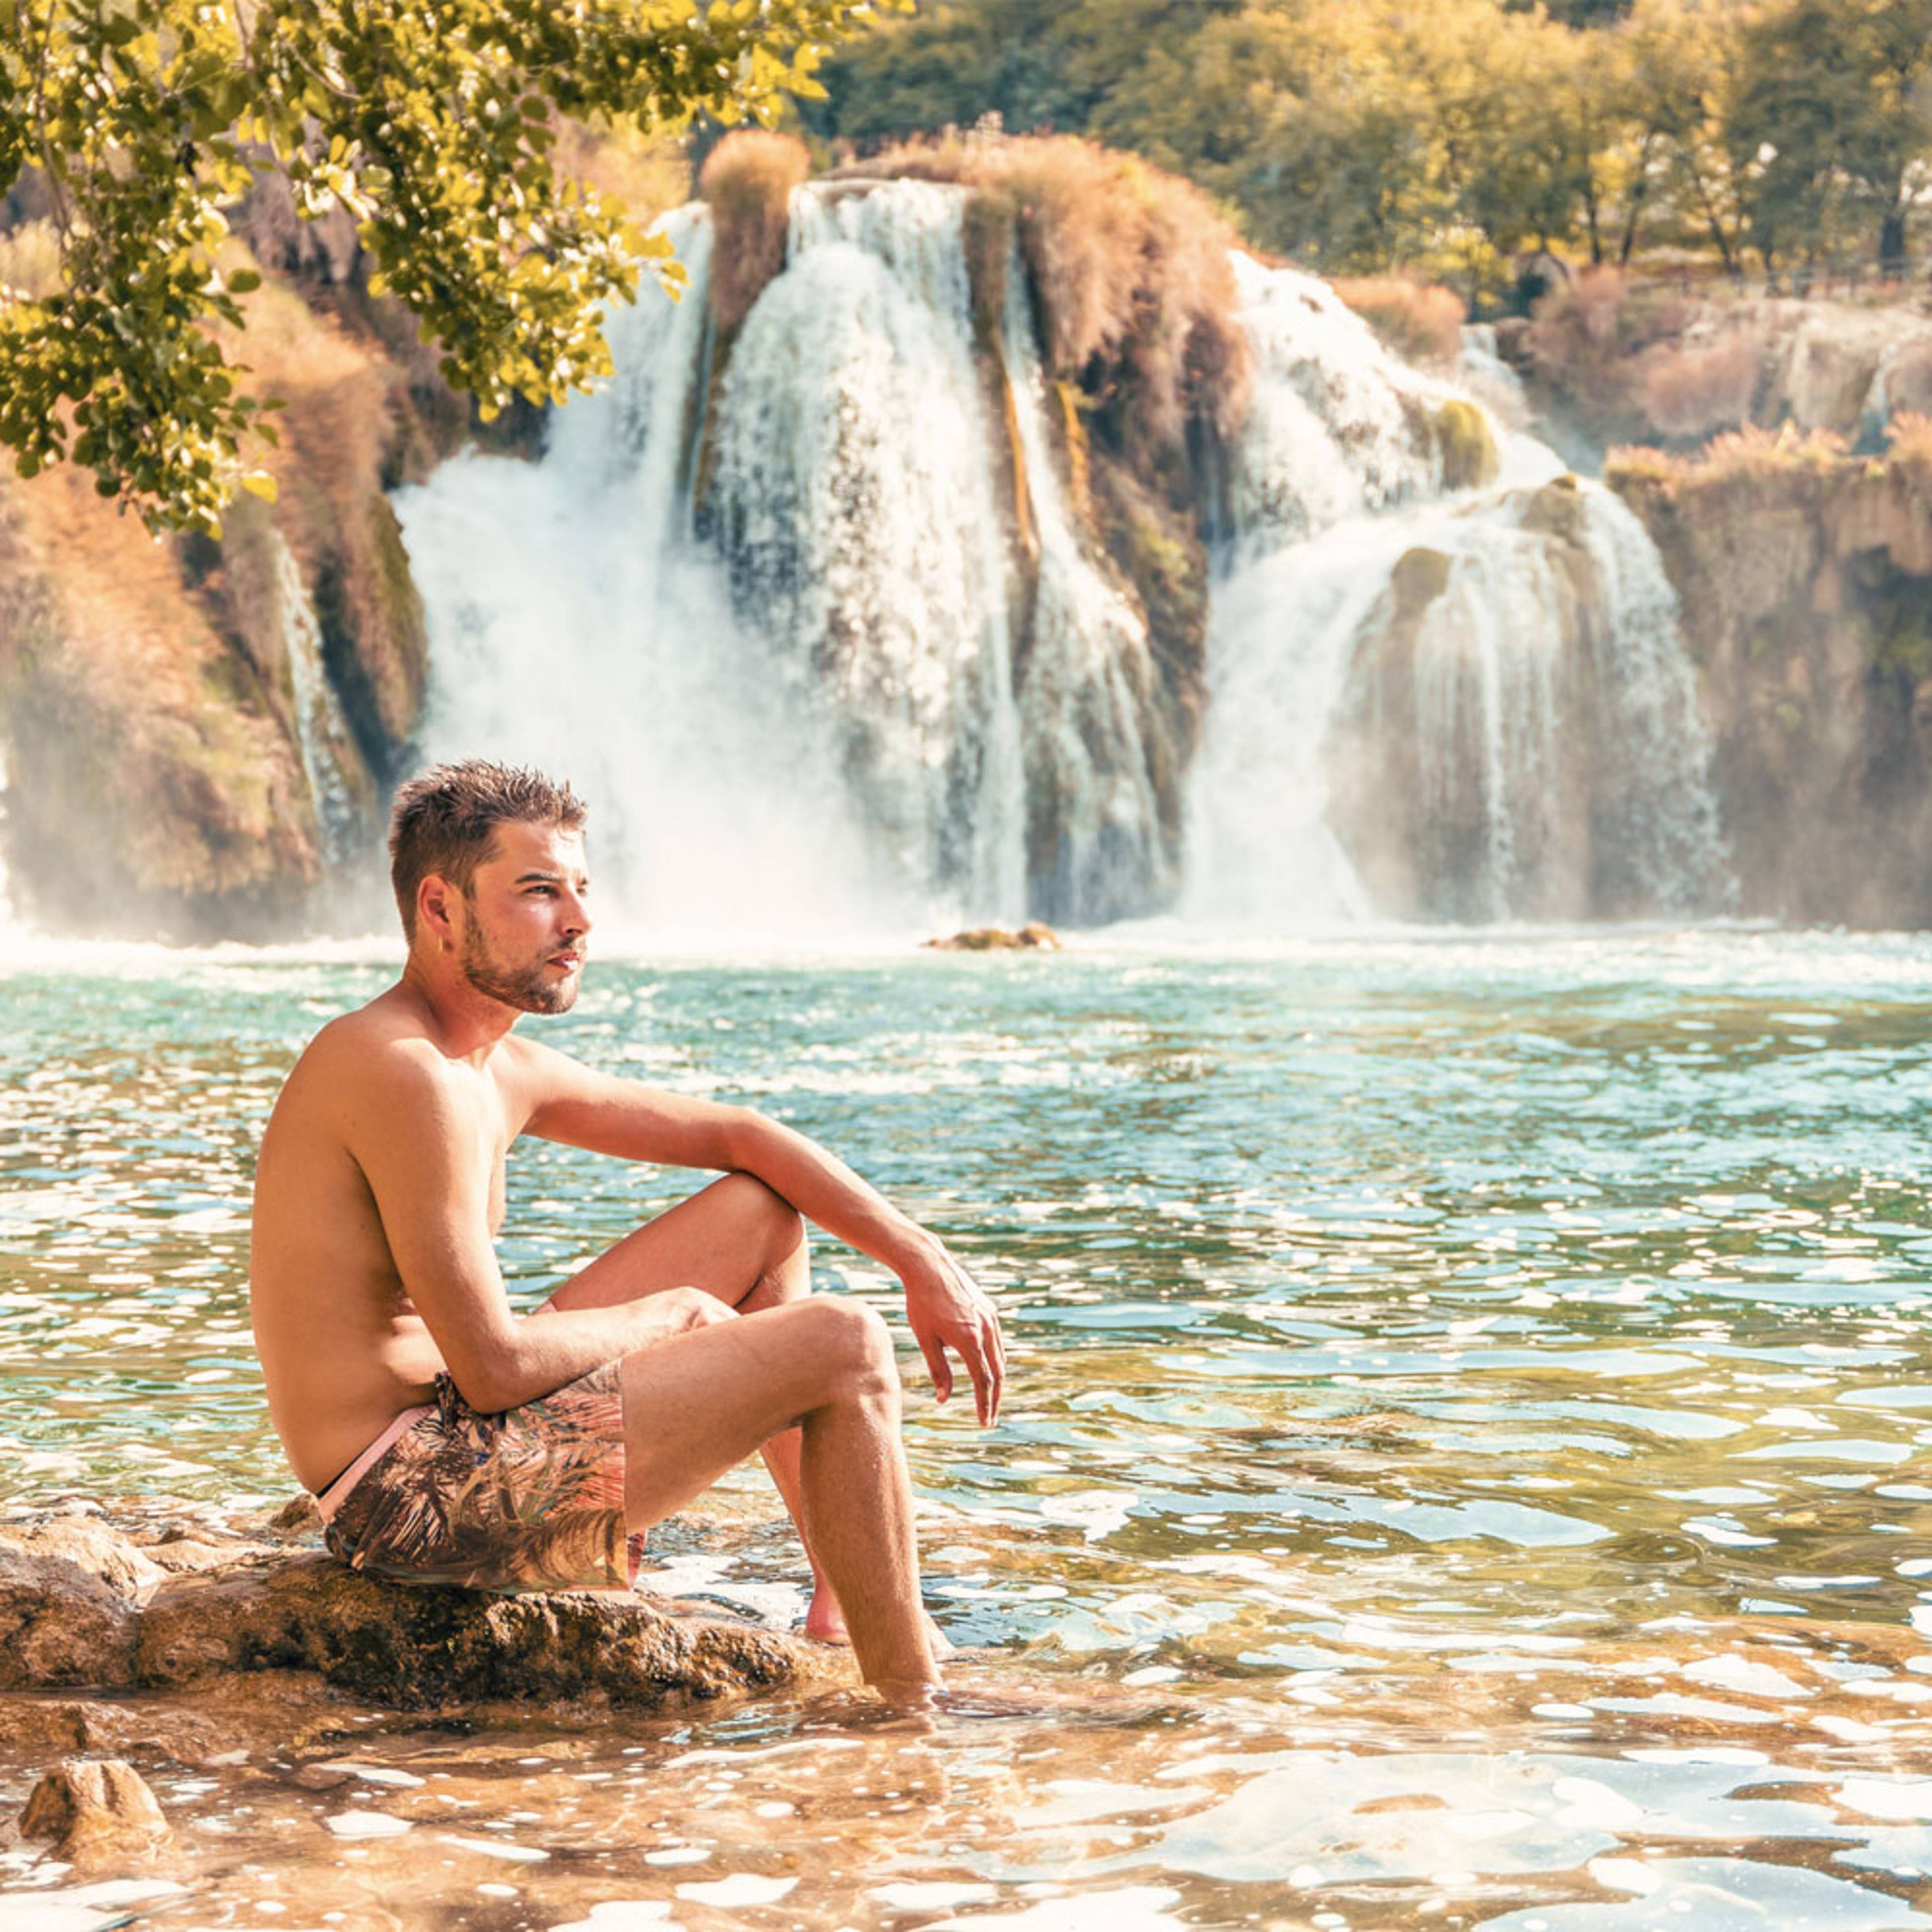 Experience wellness in Croatia with a local expert